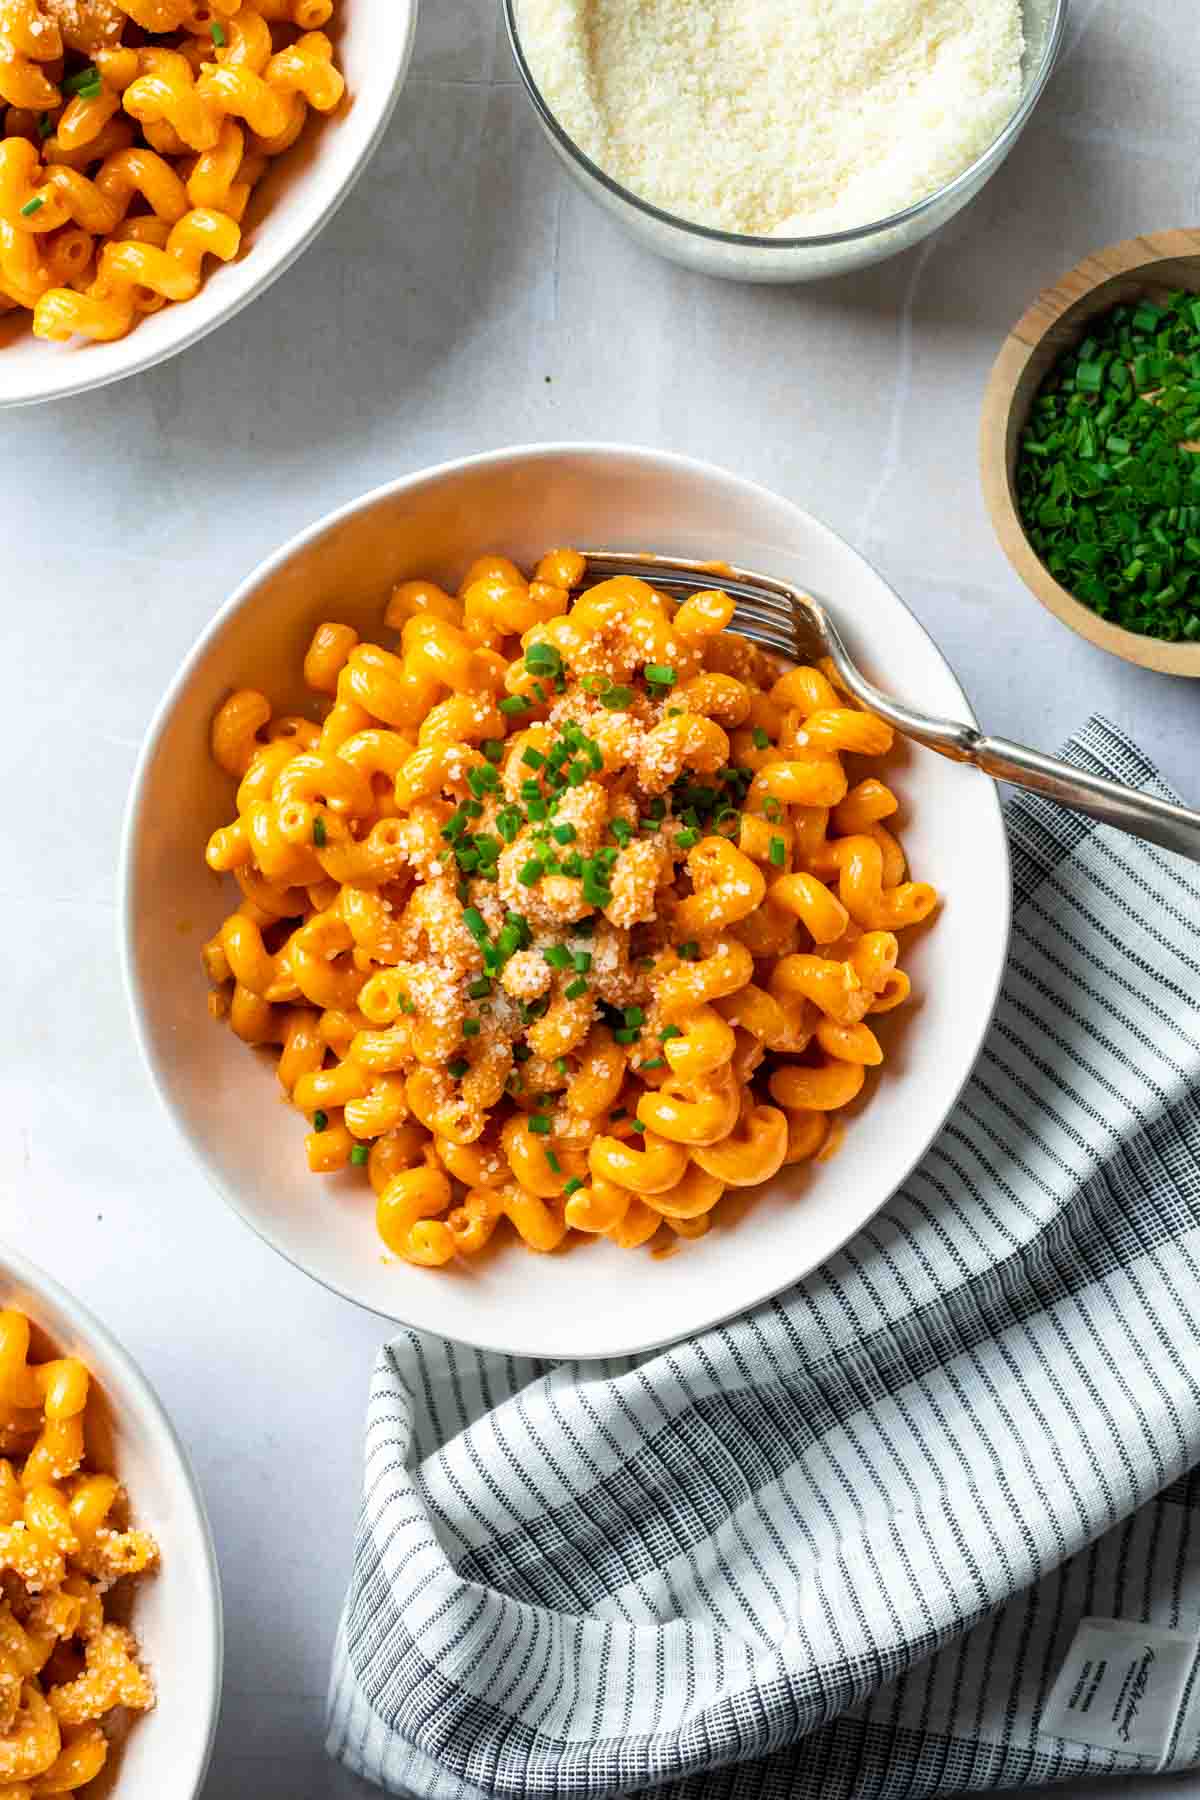 Bowls of cavatappi noodles garnished with grated cheese and chives, a bowl of chives to the side with a bowl of grated cheese. 